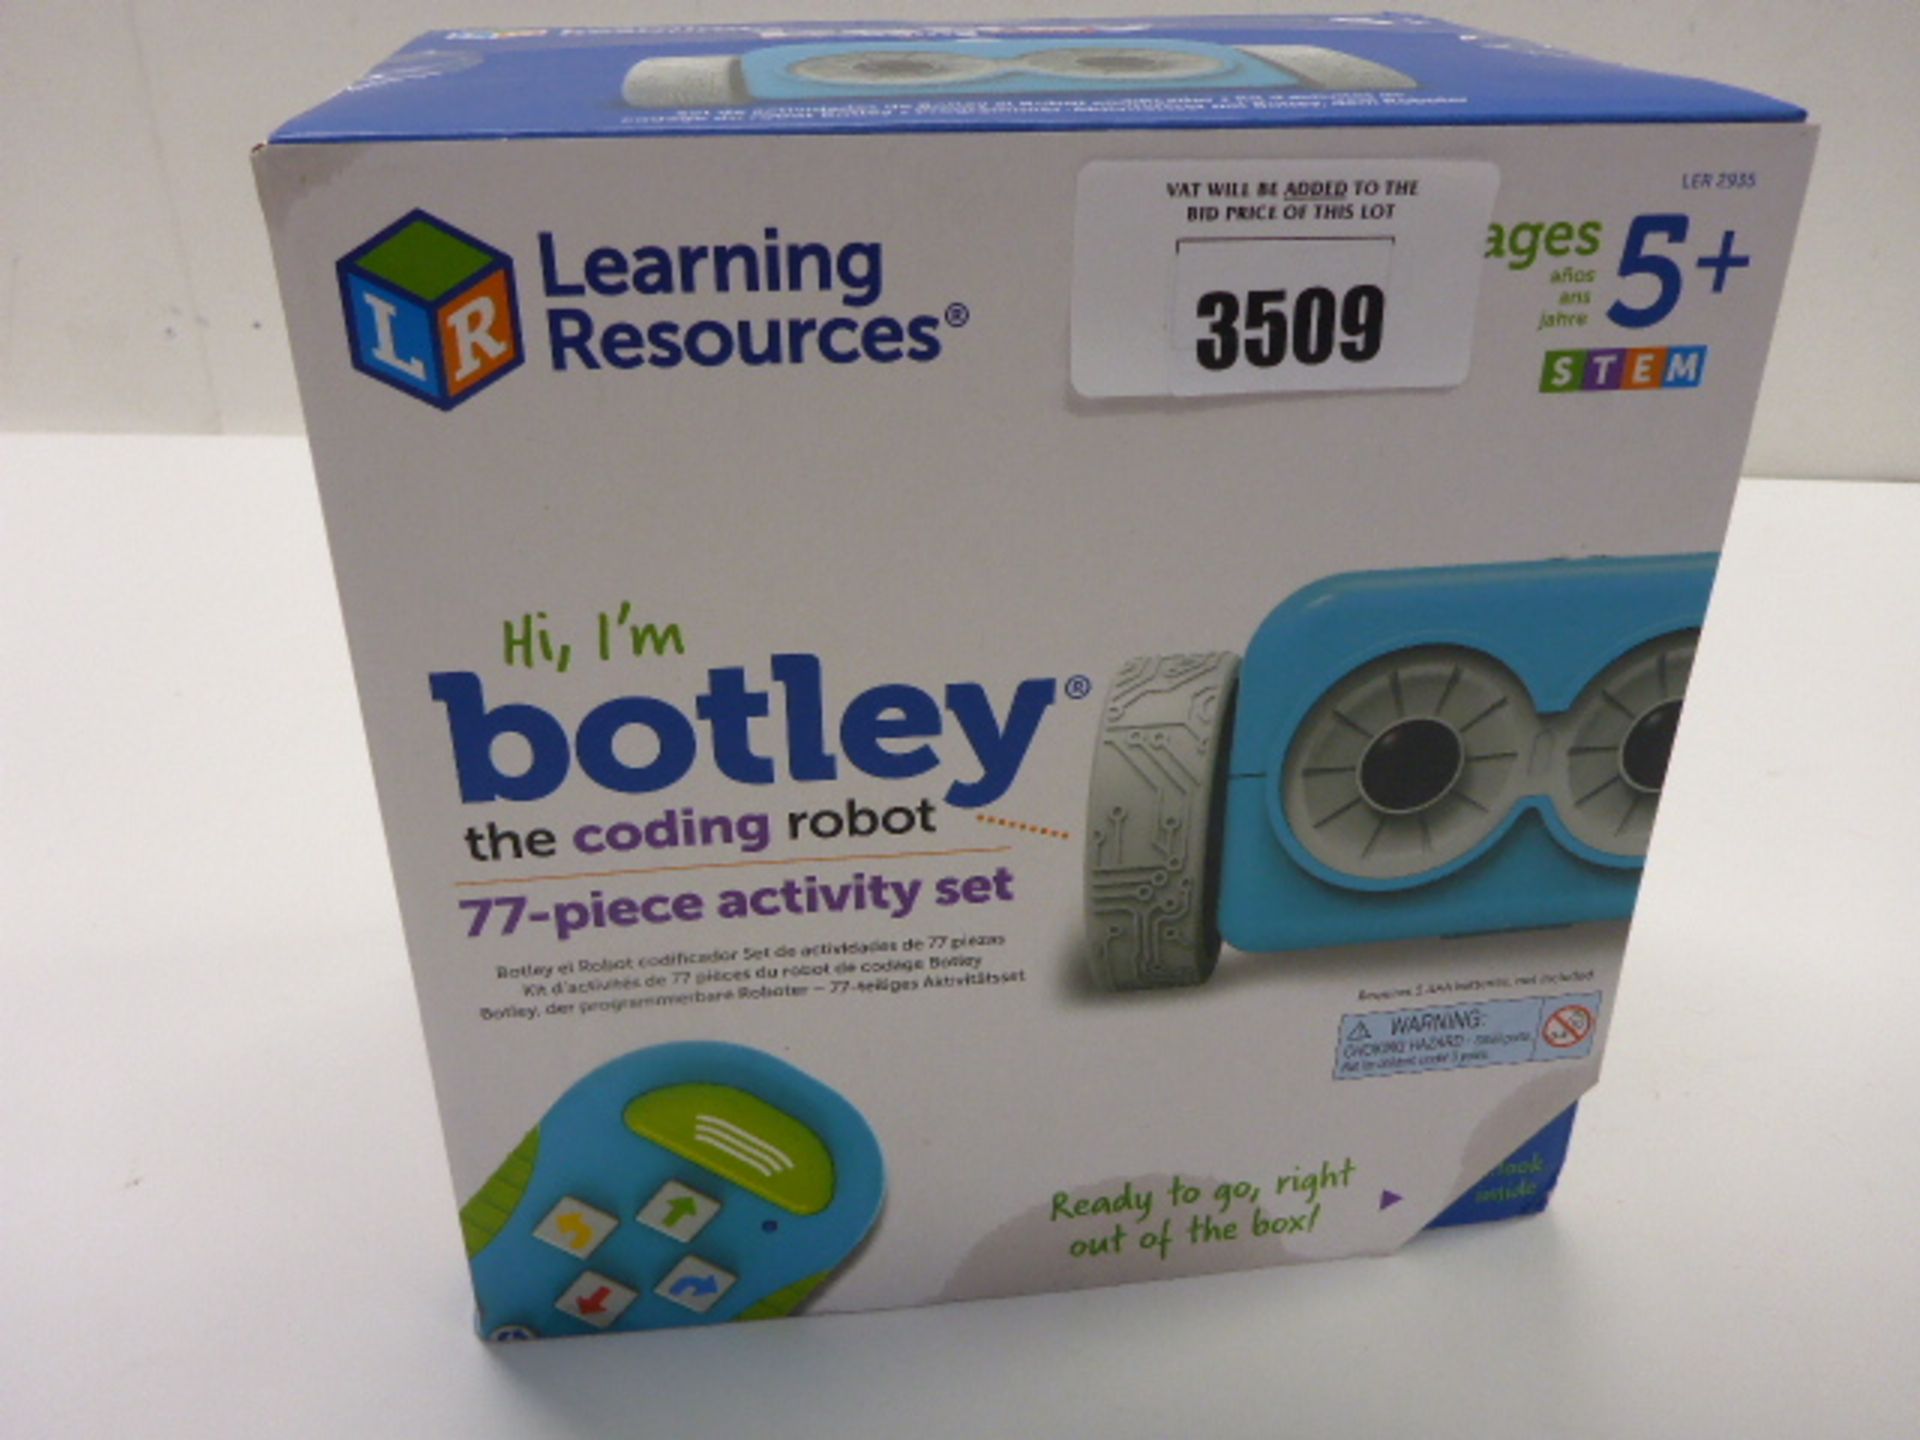 Learning Resources Botley the coding robot